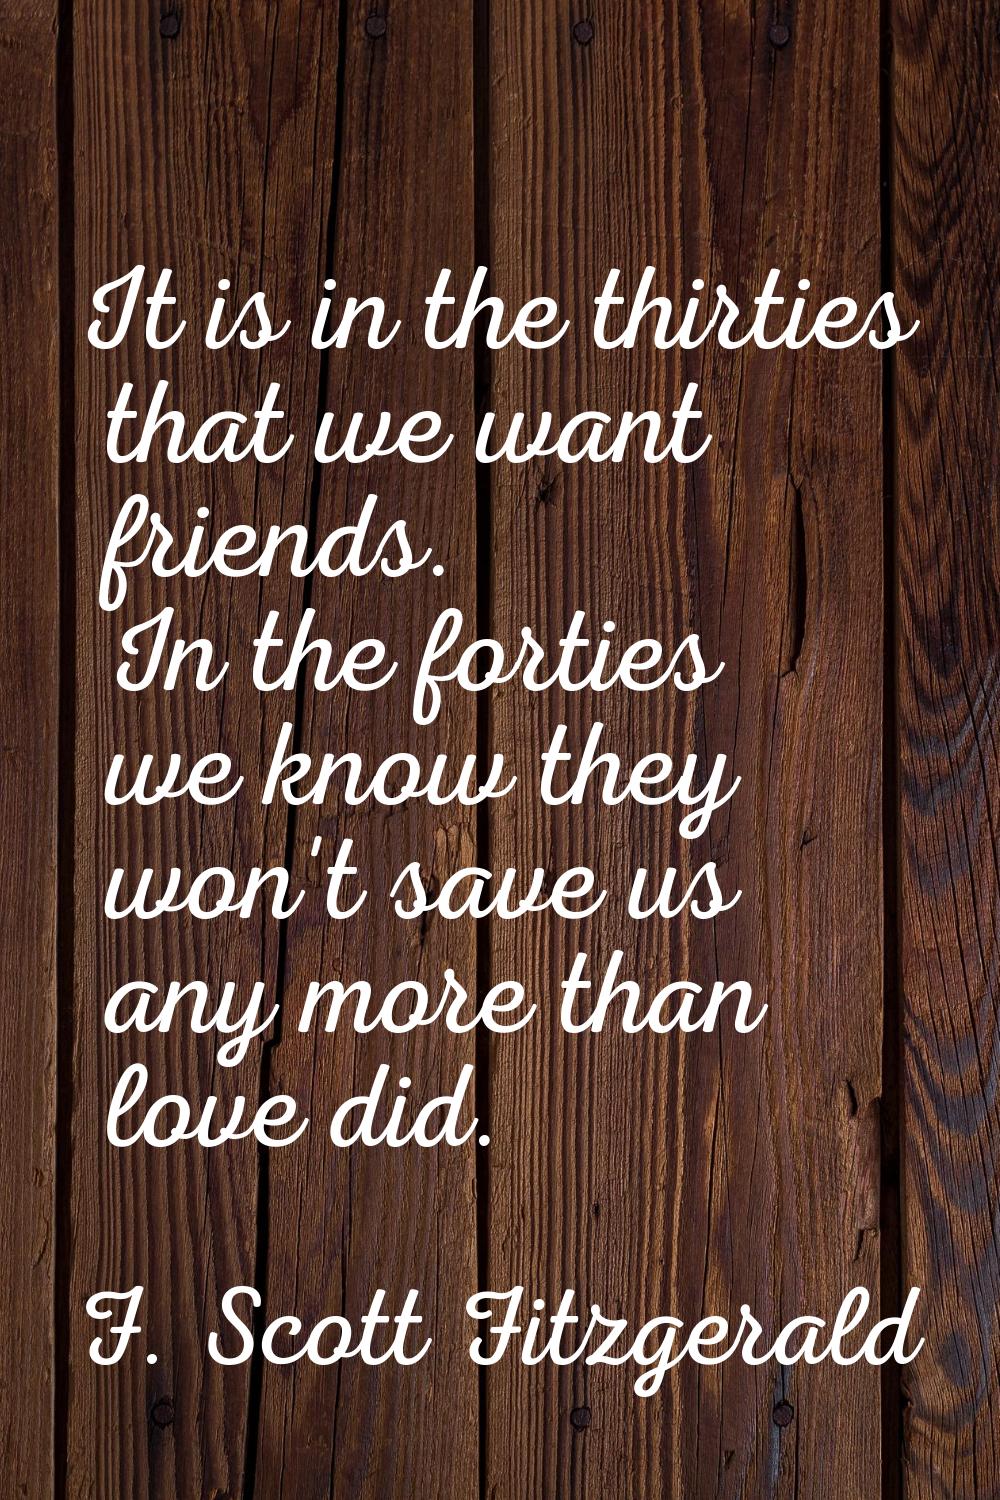 It is in the thirties that we want friends. In the forties we know they won't save us any more than